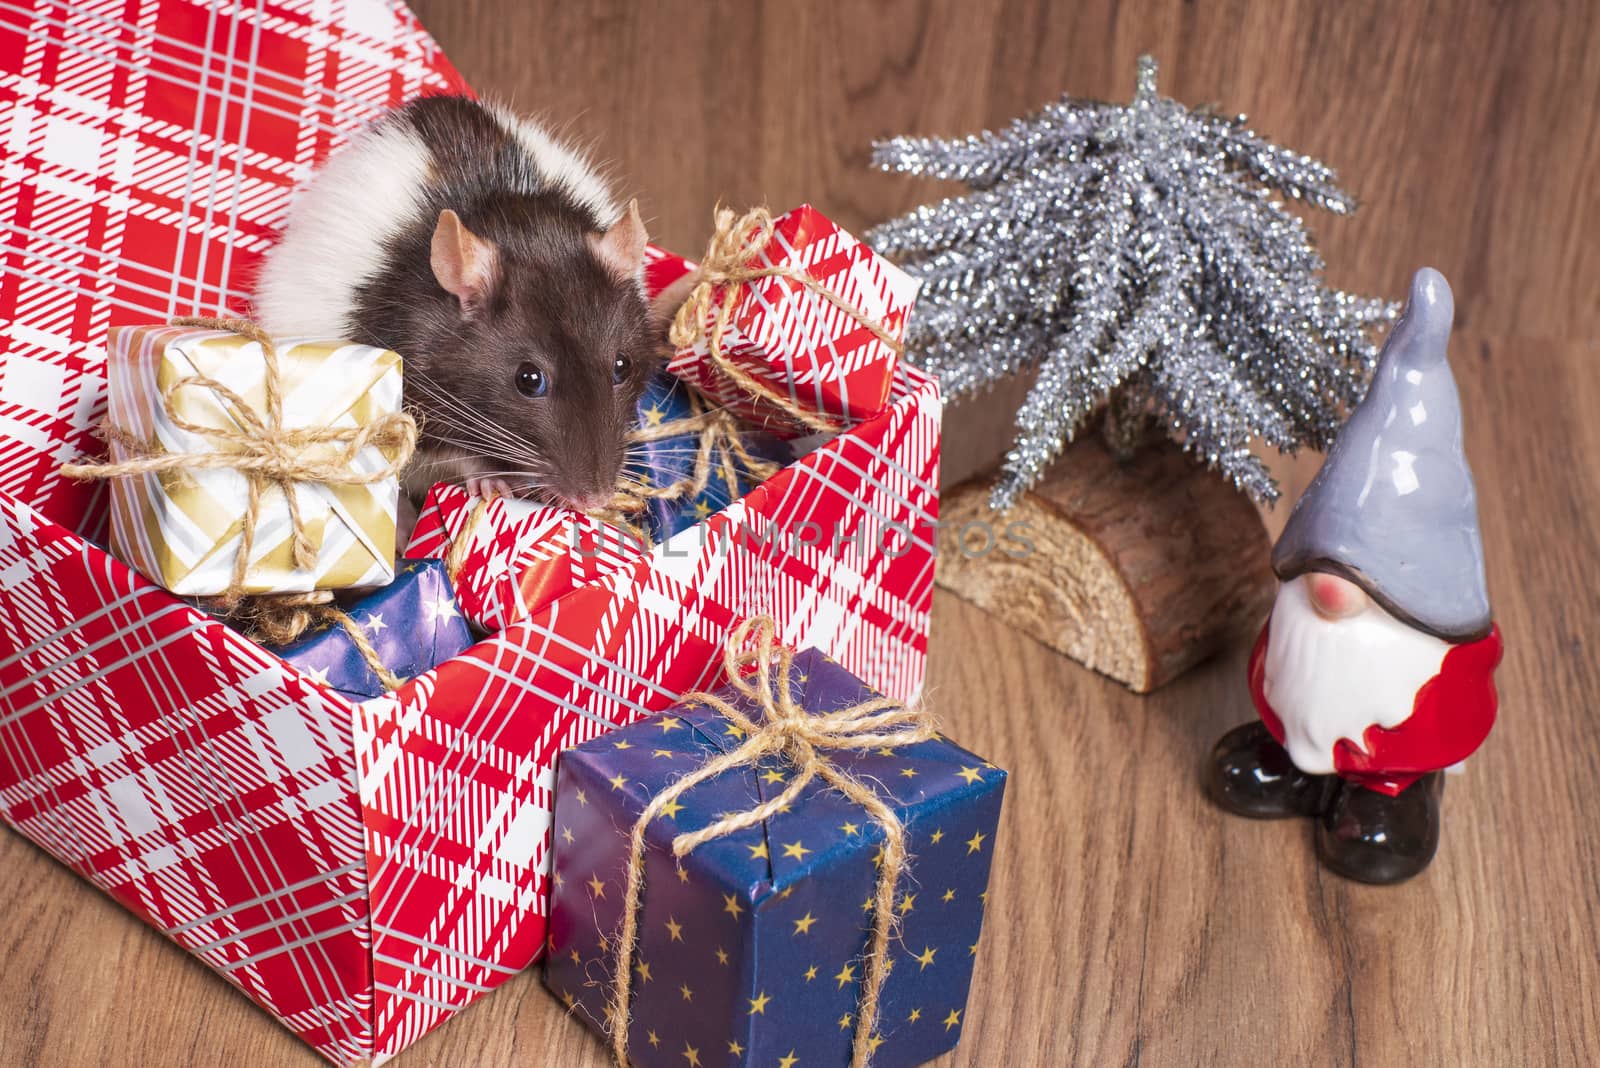 Rat is a symbol of the new year.Gray rat looks at gift boxes. little rat in a gift box. Symbol of the year 2020.